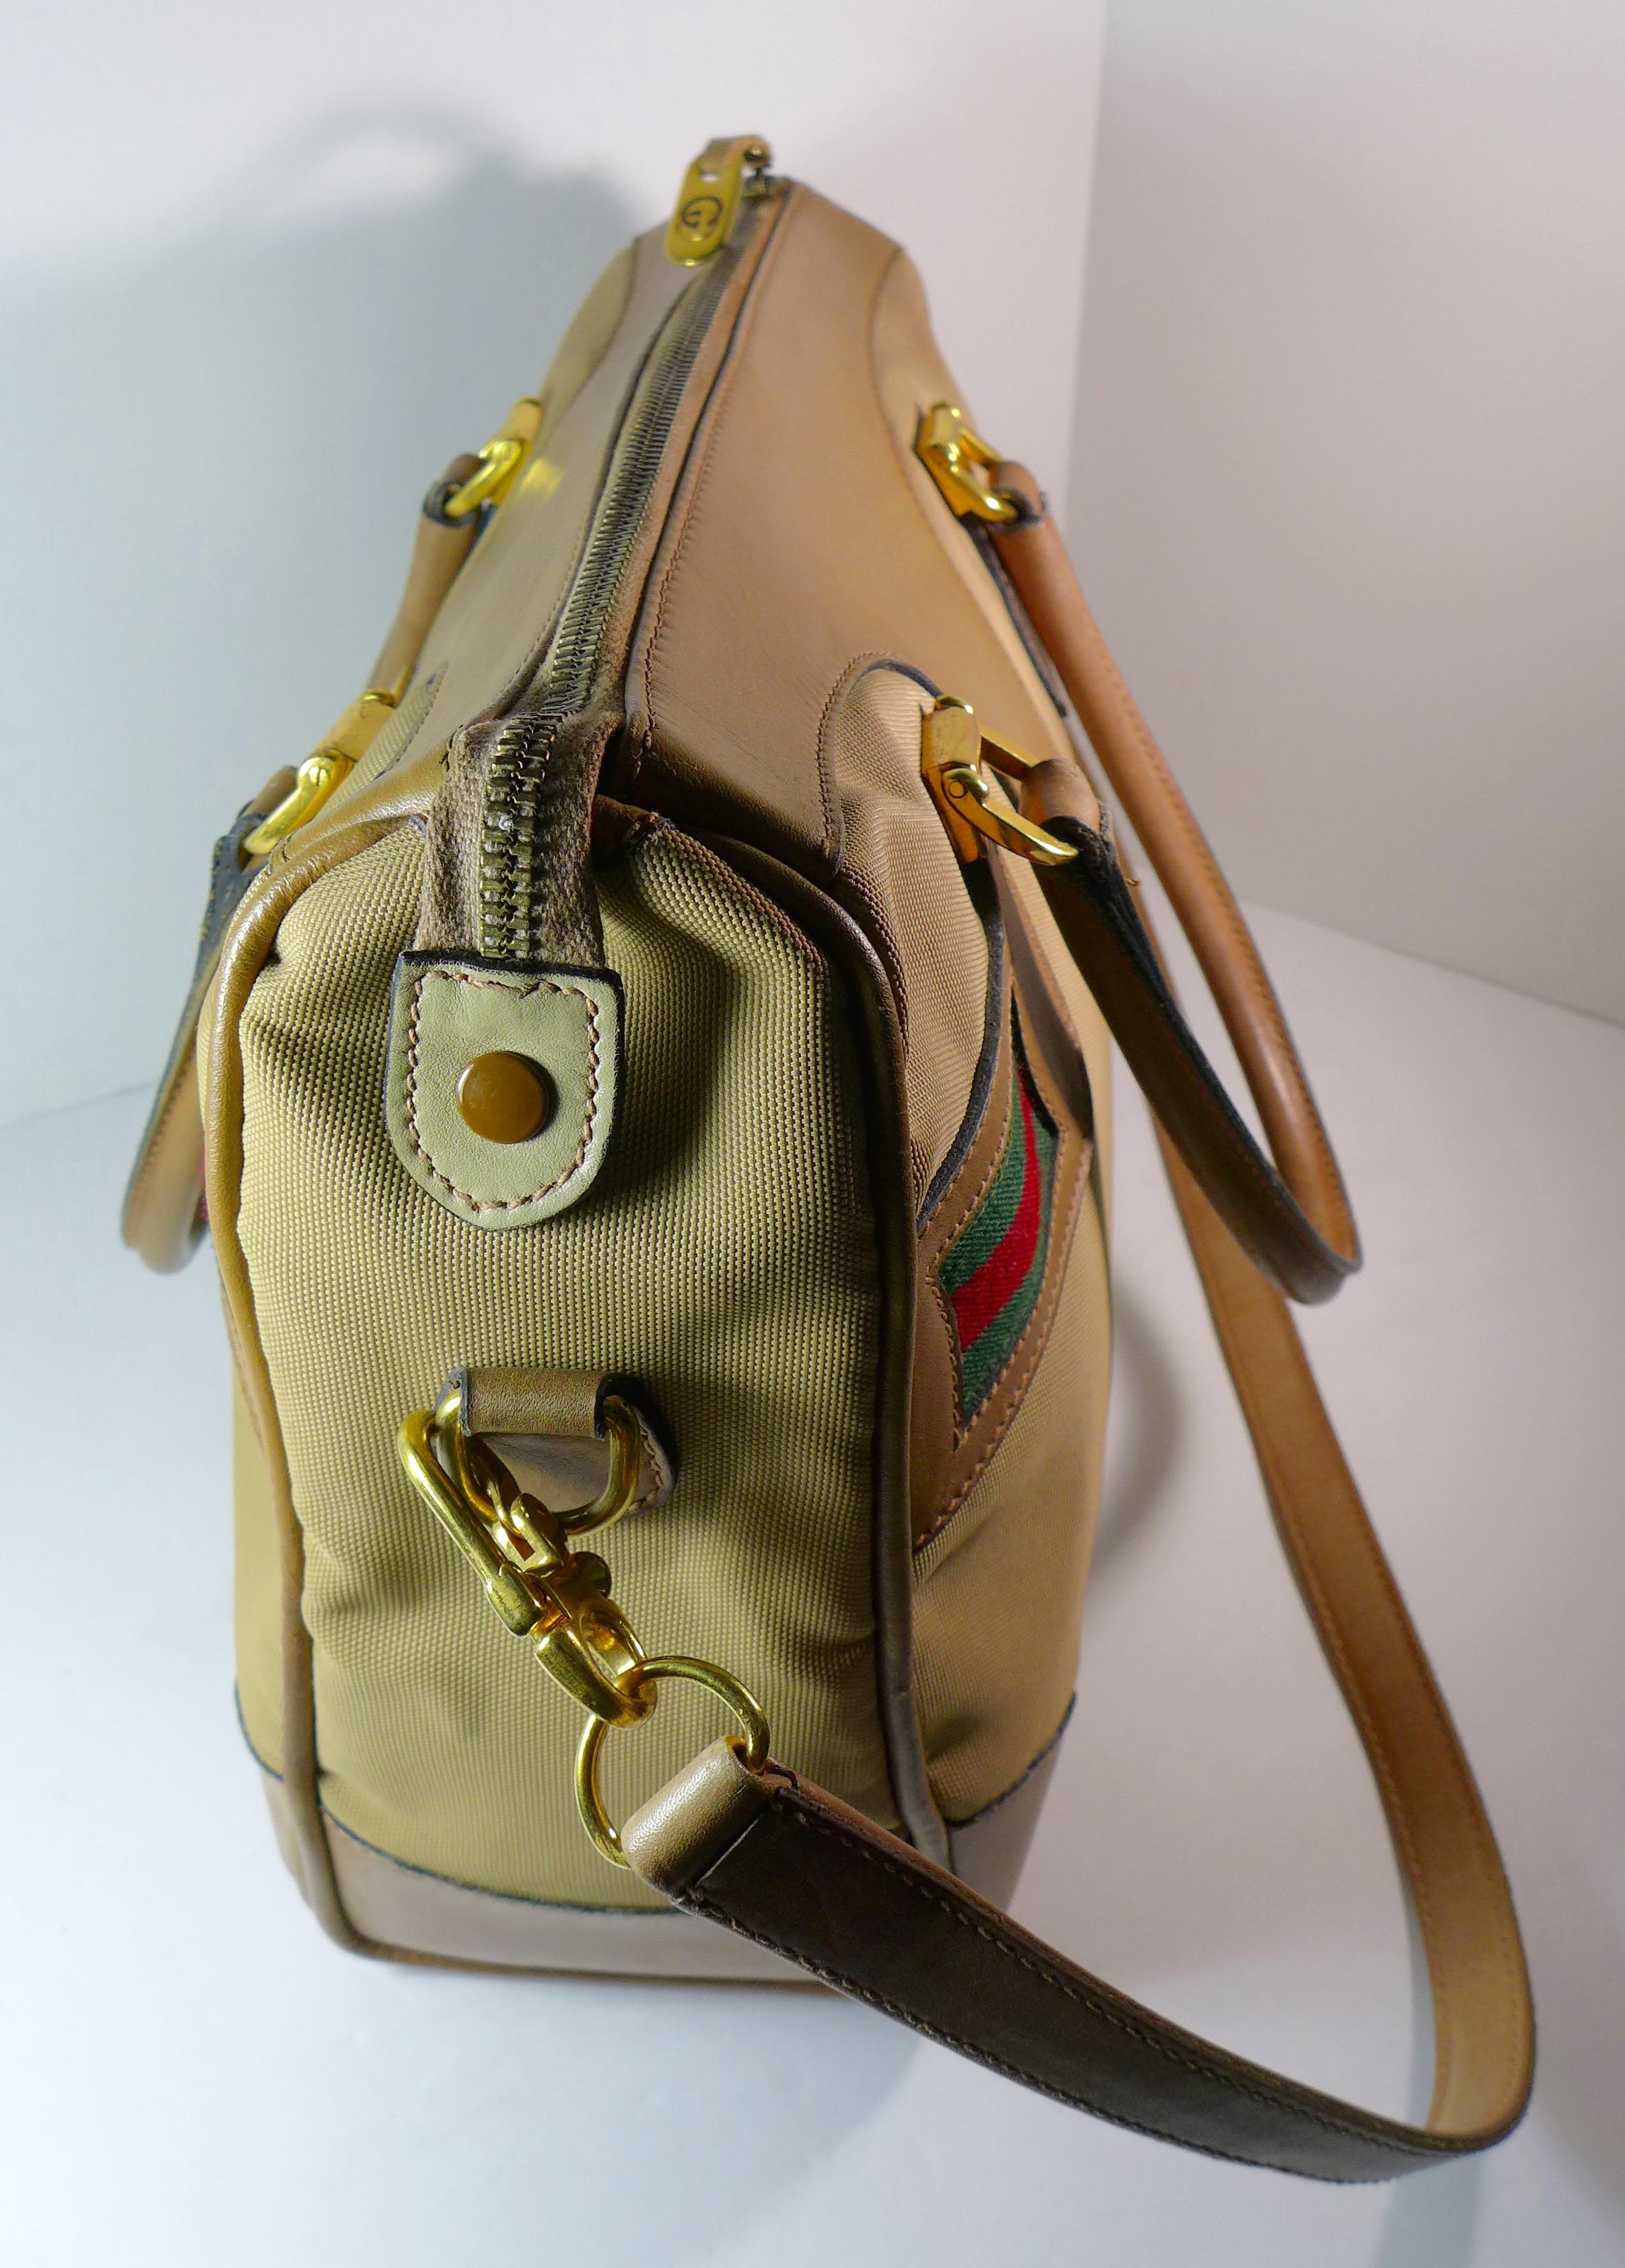 This spacious Gucci tan leather and canvas bag features a leather shoulder strap, leather handles, gold hardware, and the iconic green and red stripes. The bag has a zipper closure and inside zip pocket. 

Measurements in Inches: 
Height: 11
Length: